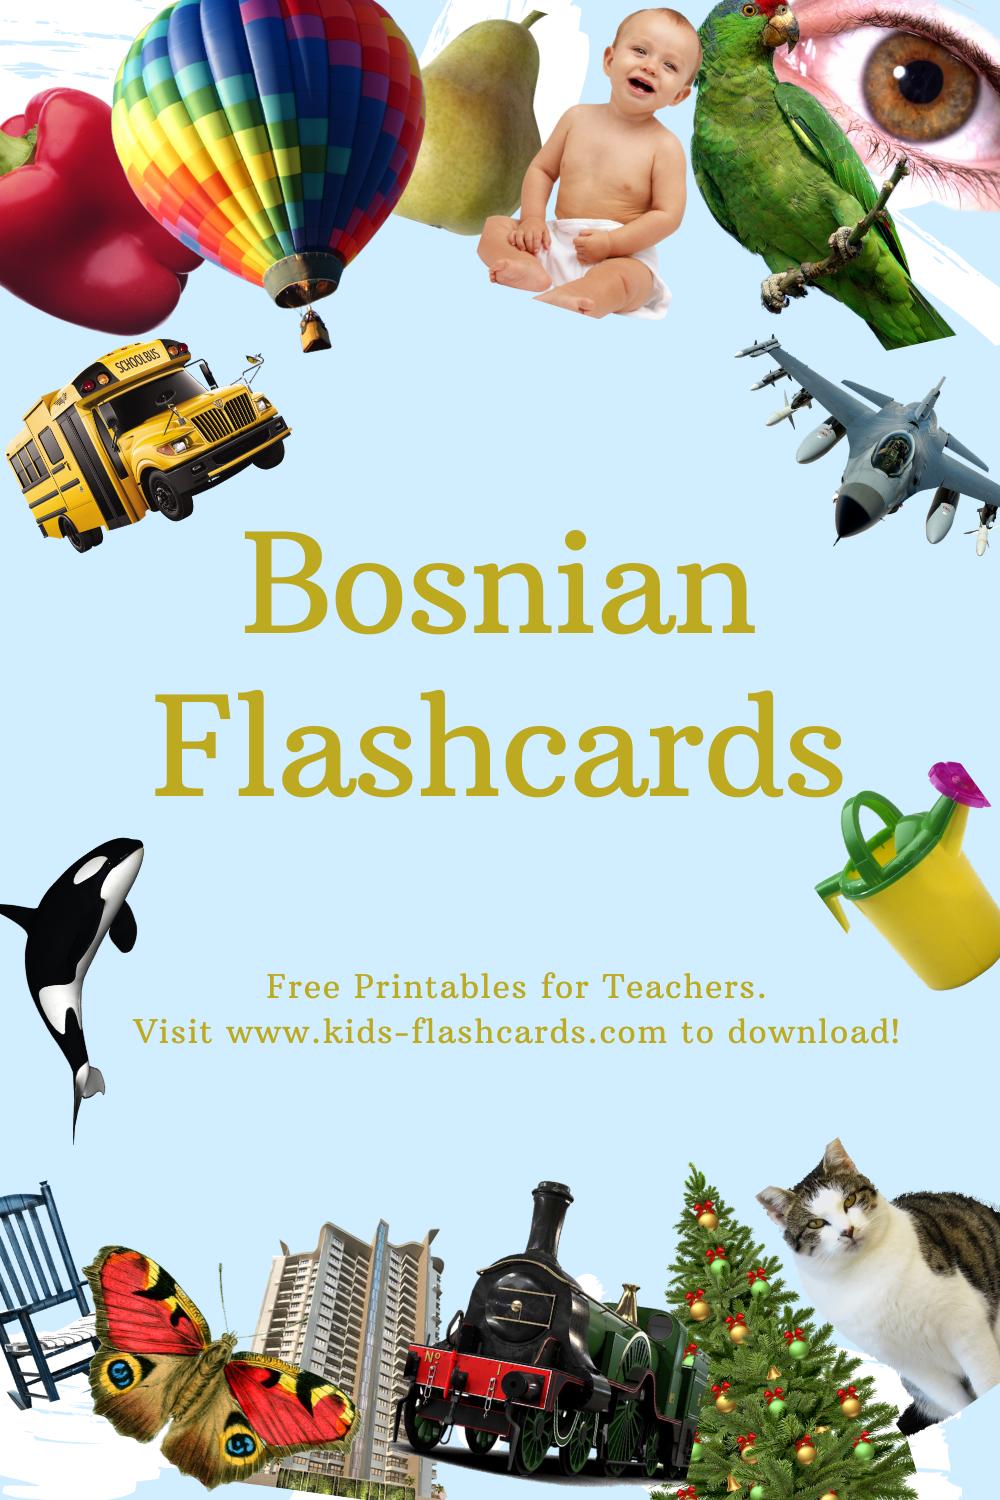 Worksheets to learn Bosnian language